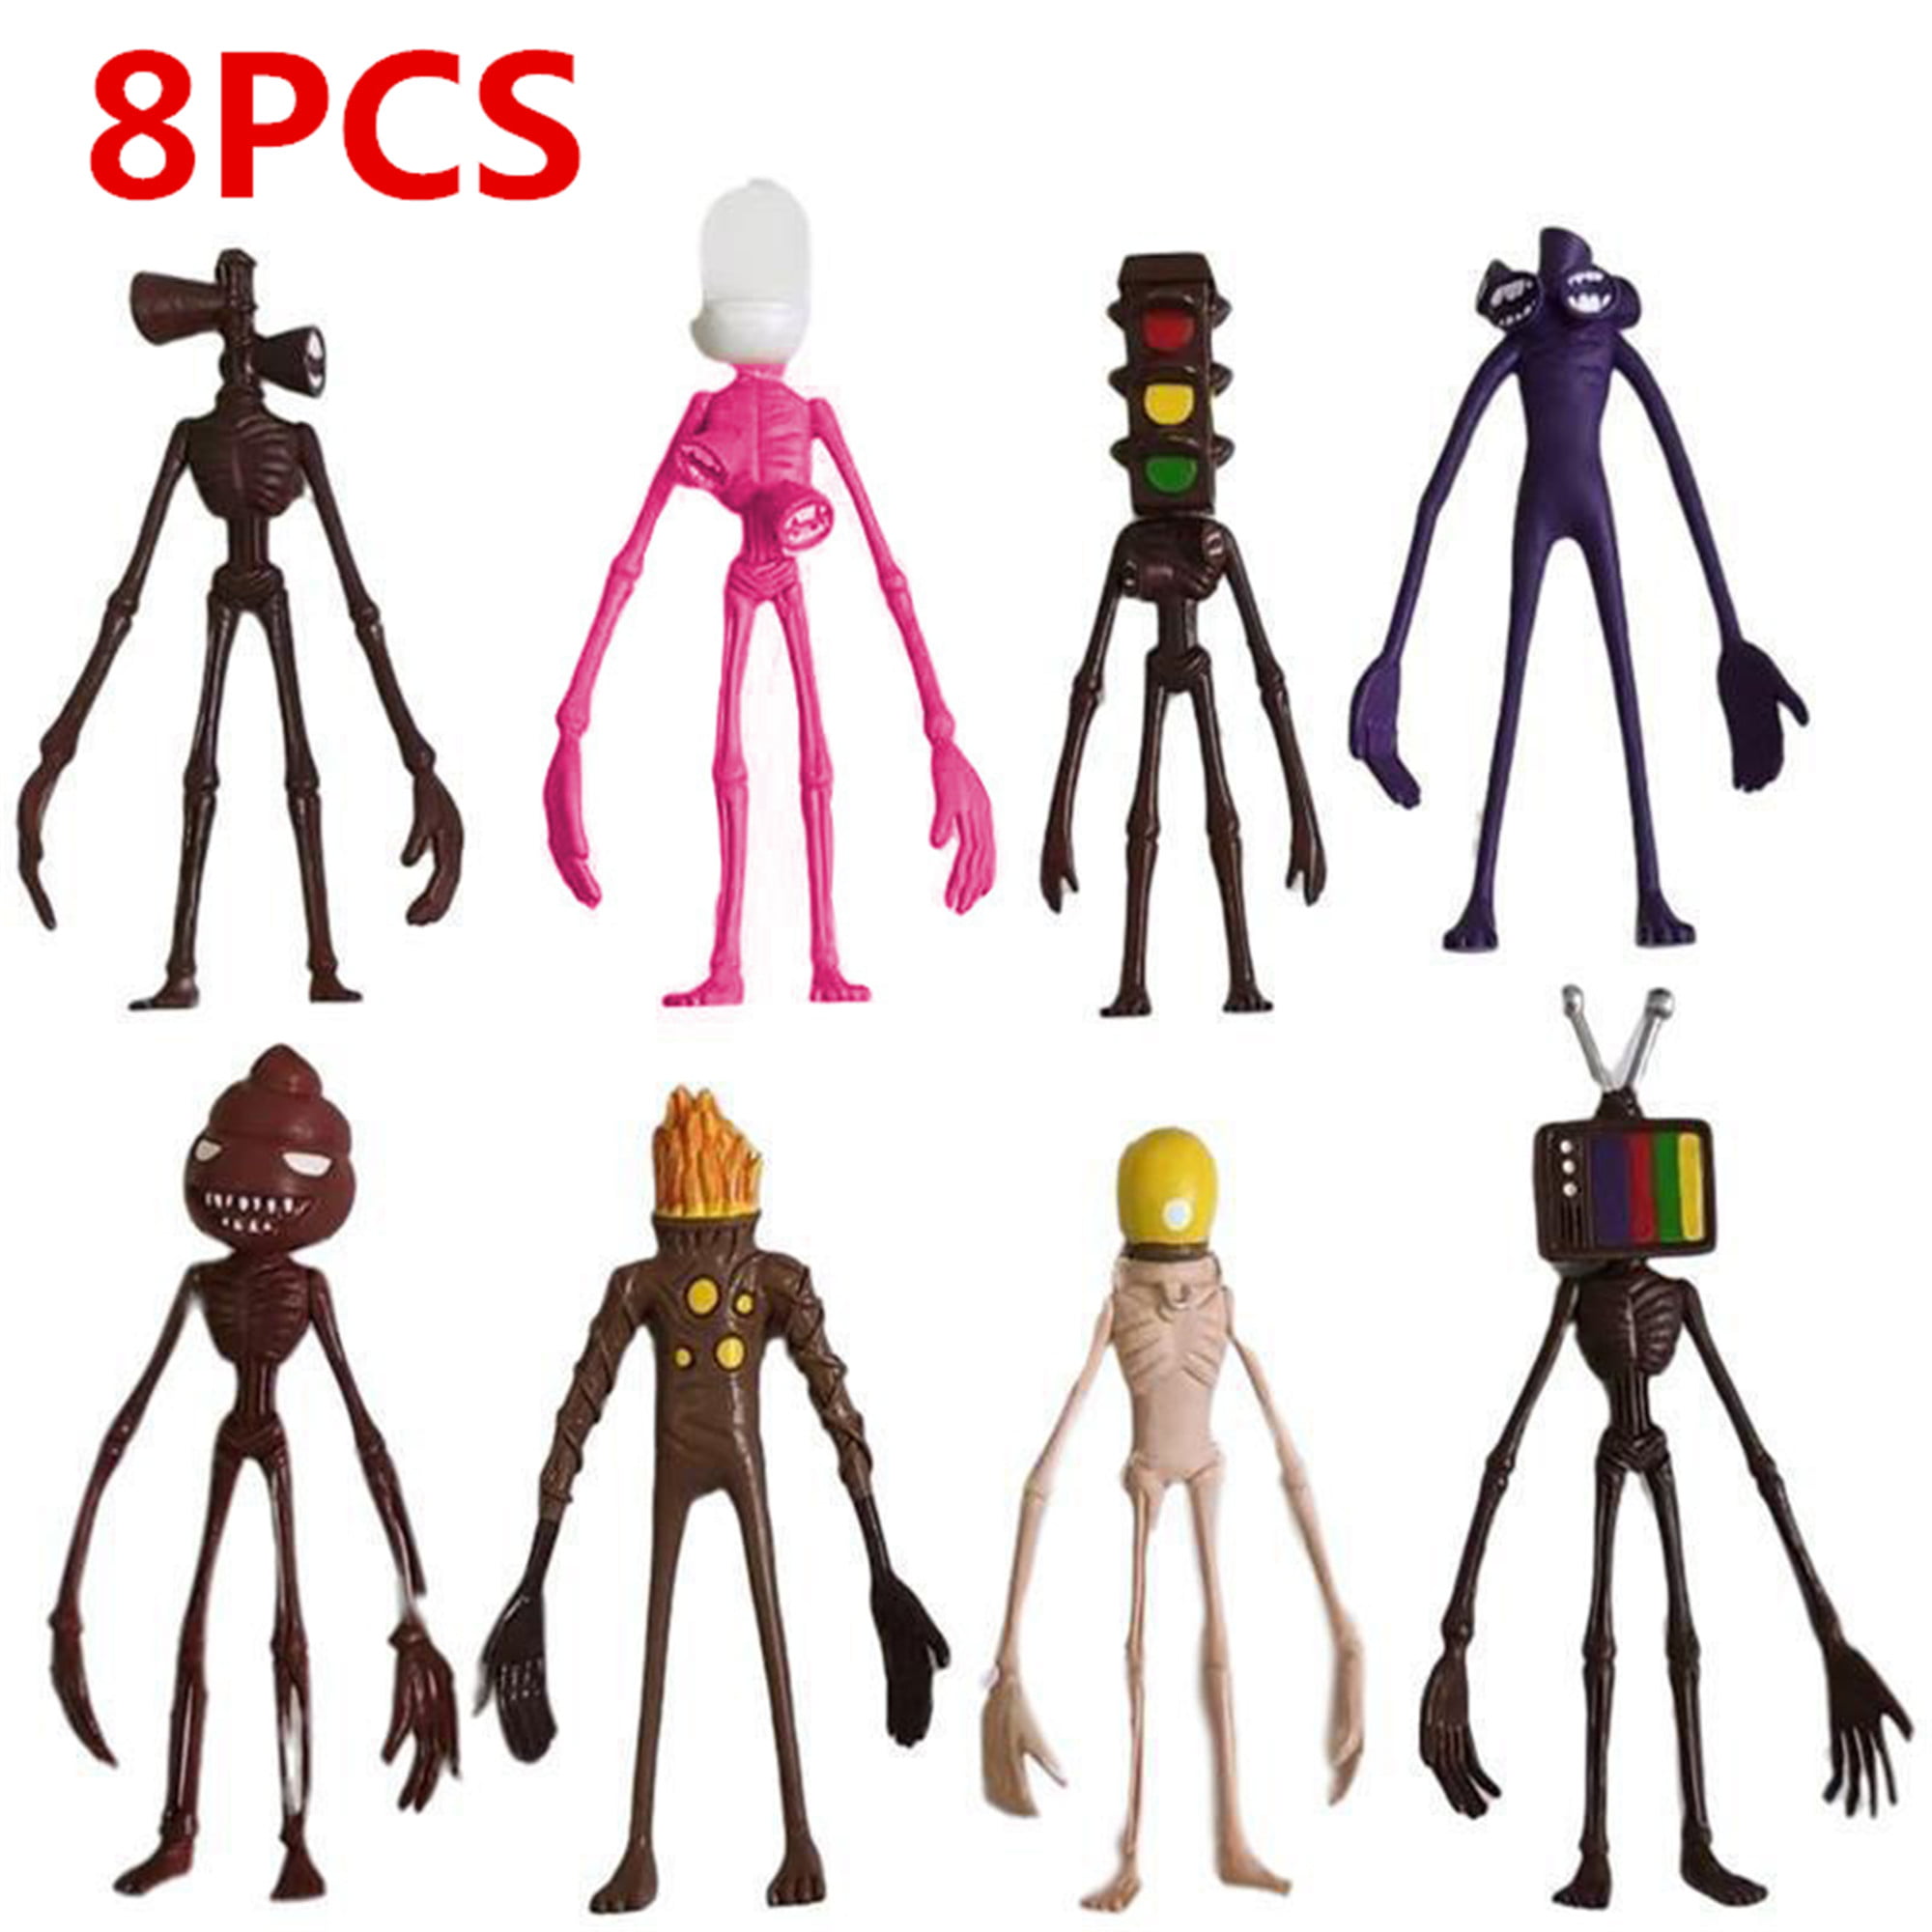 Details about   SCP foundation scp 1123 049 Action Figure Skull Model Doll Toy PVC siren head 